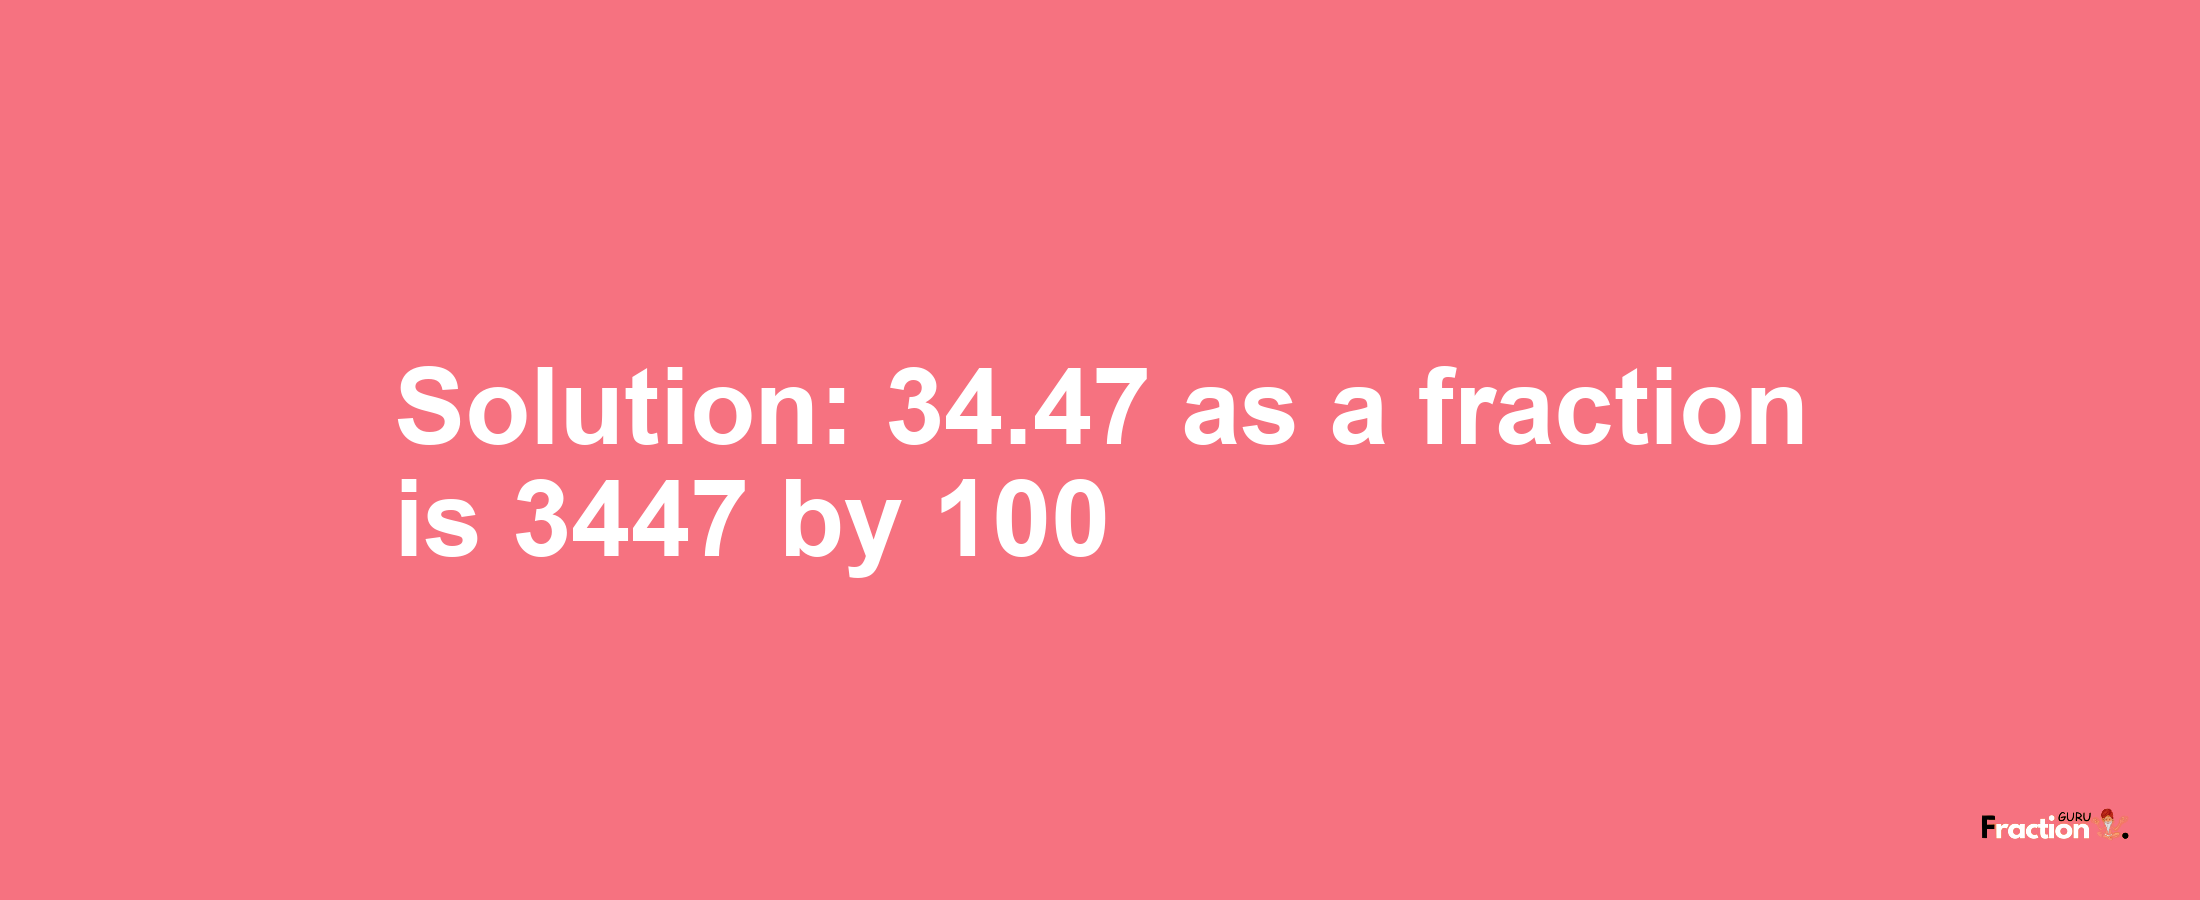 Solution:34.47 as a fraction is 3447/100